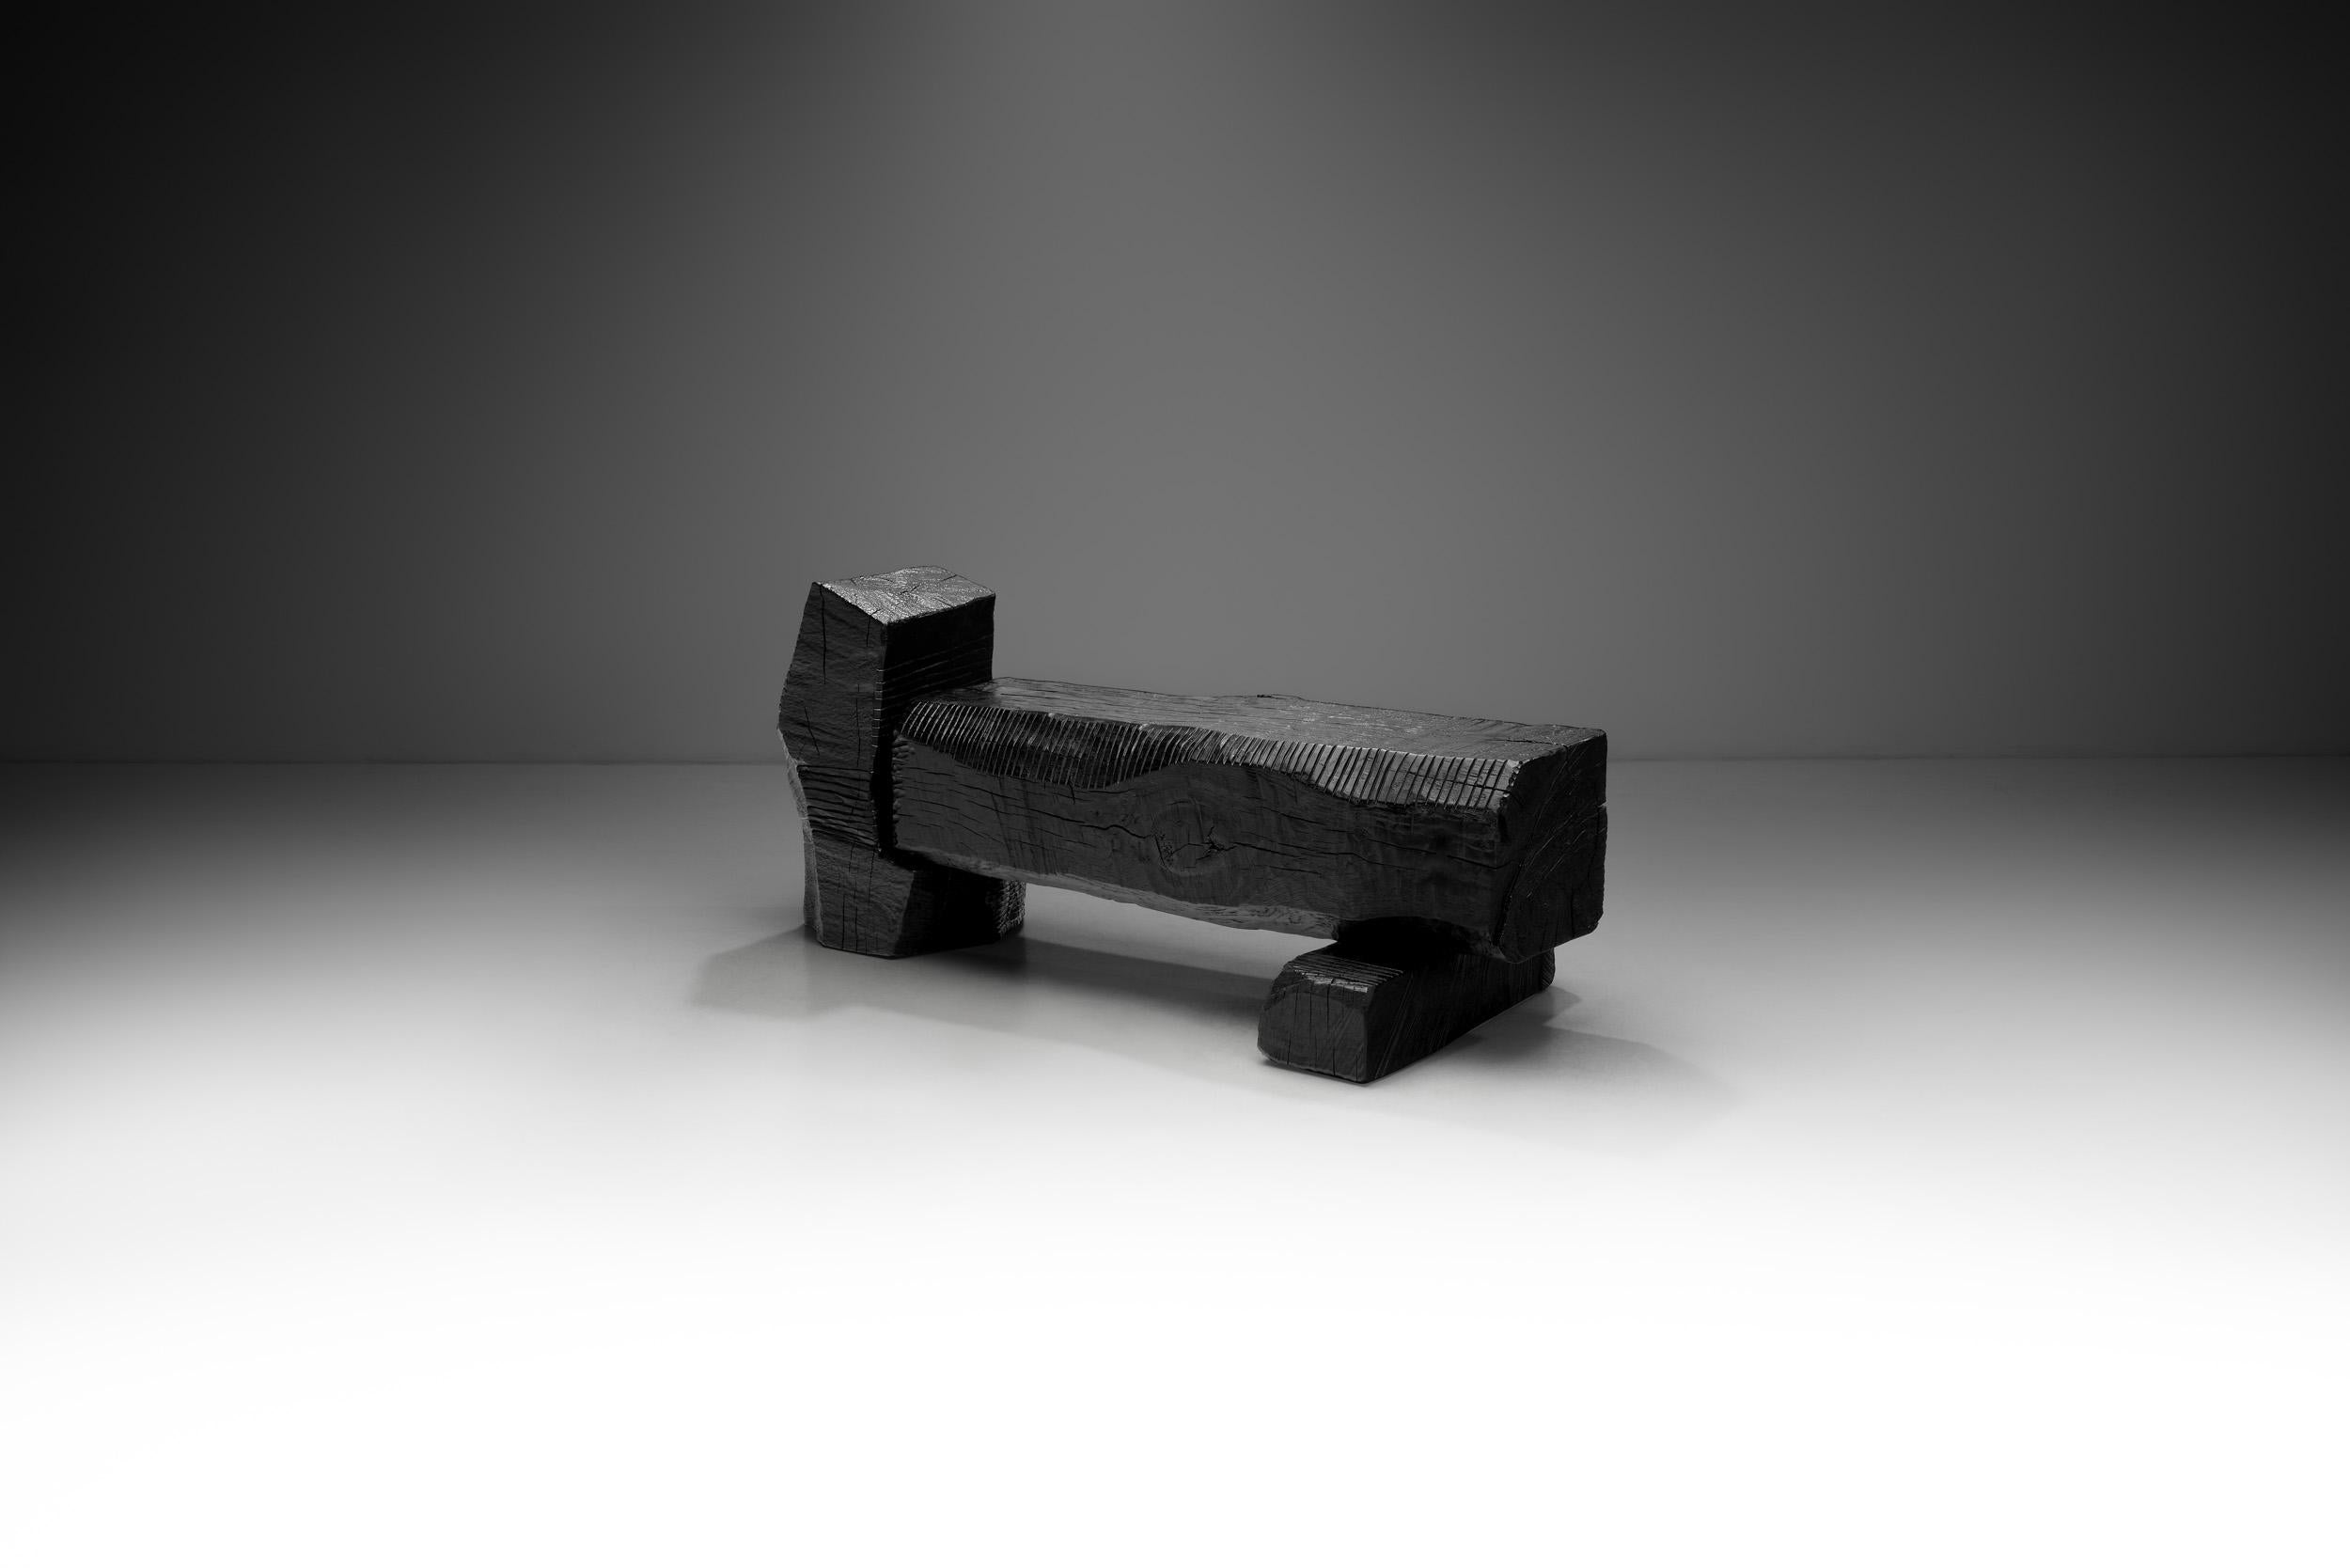 Robin Berrewaerts’s black oak bench is hand-sculpted and made of ebonized oak with an oil finish. Each piece is a unique expression, attacking the wood with the appropriate tools and finding by slow sensuous manipulation the best aesthetic effect,